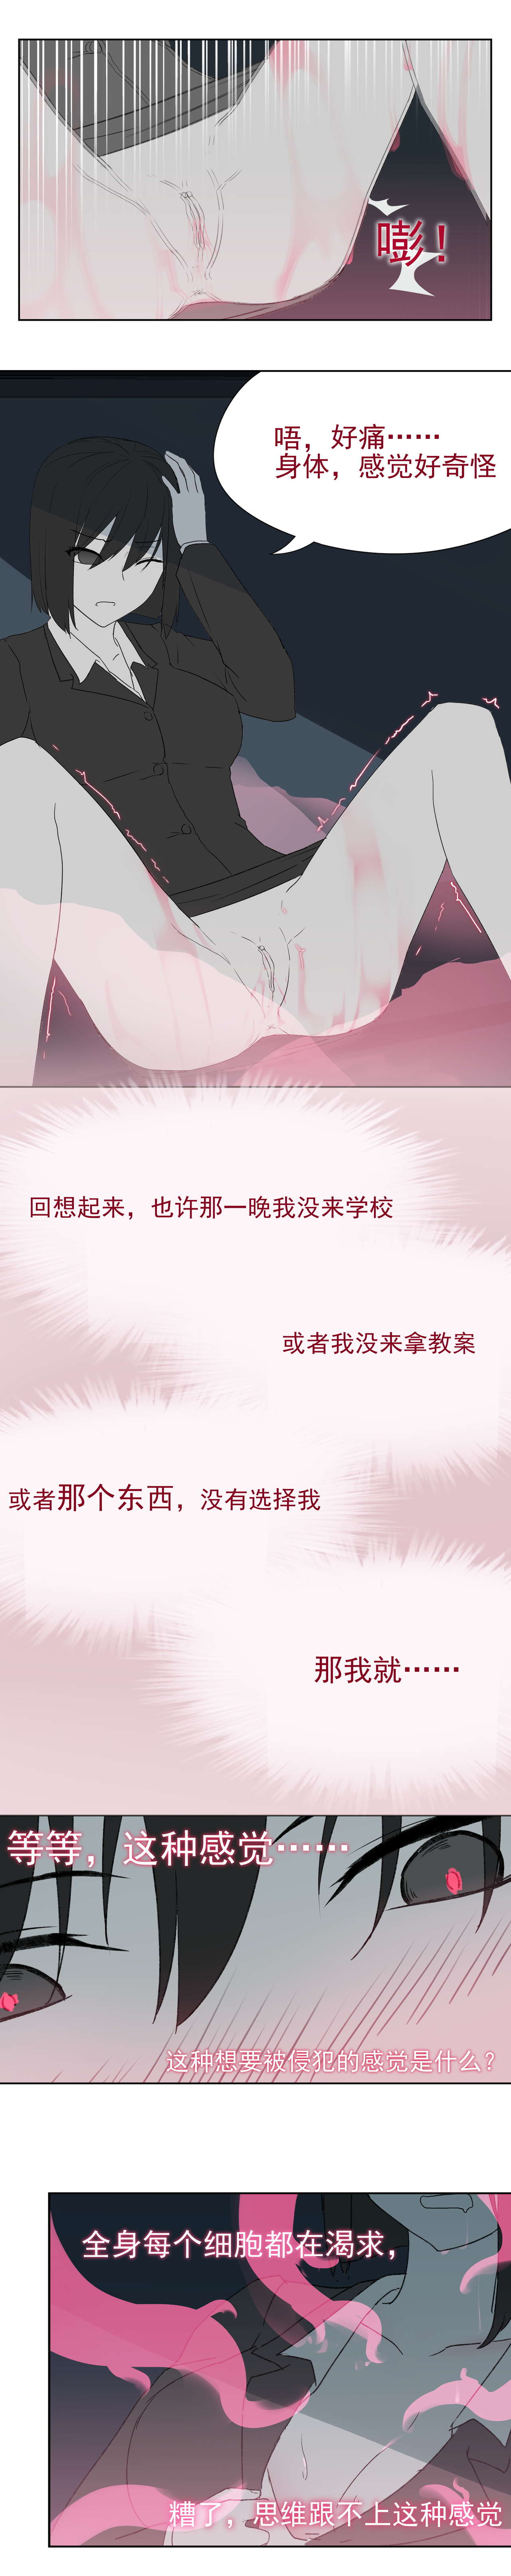 [7T-黑夜的光] 寄生之恋 Tentacle love [Chinese] page 8 full